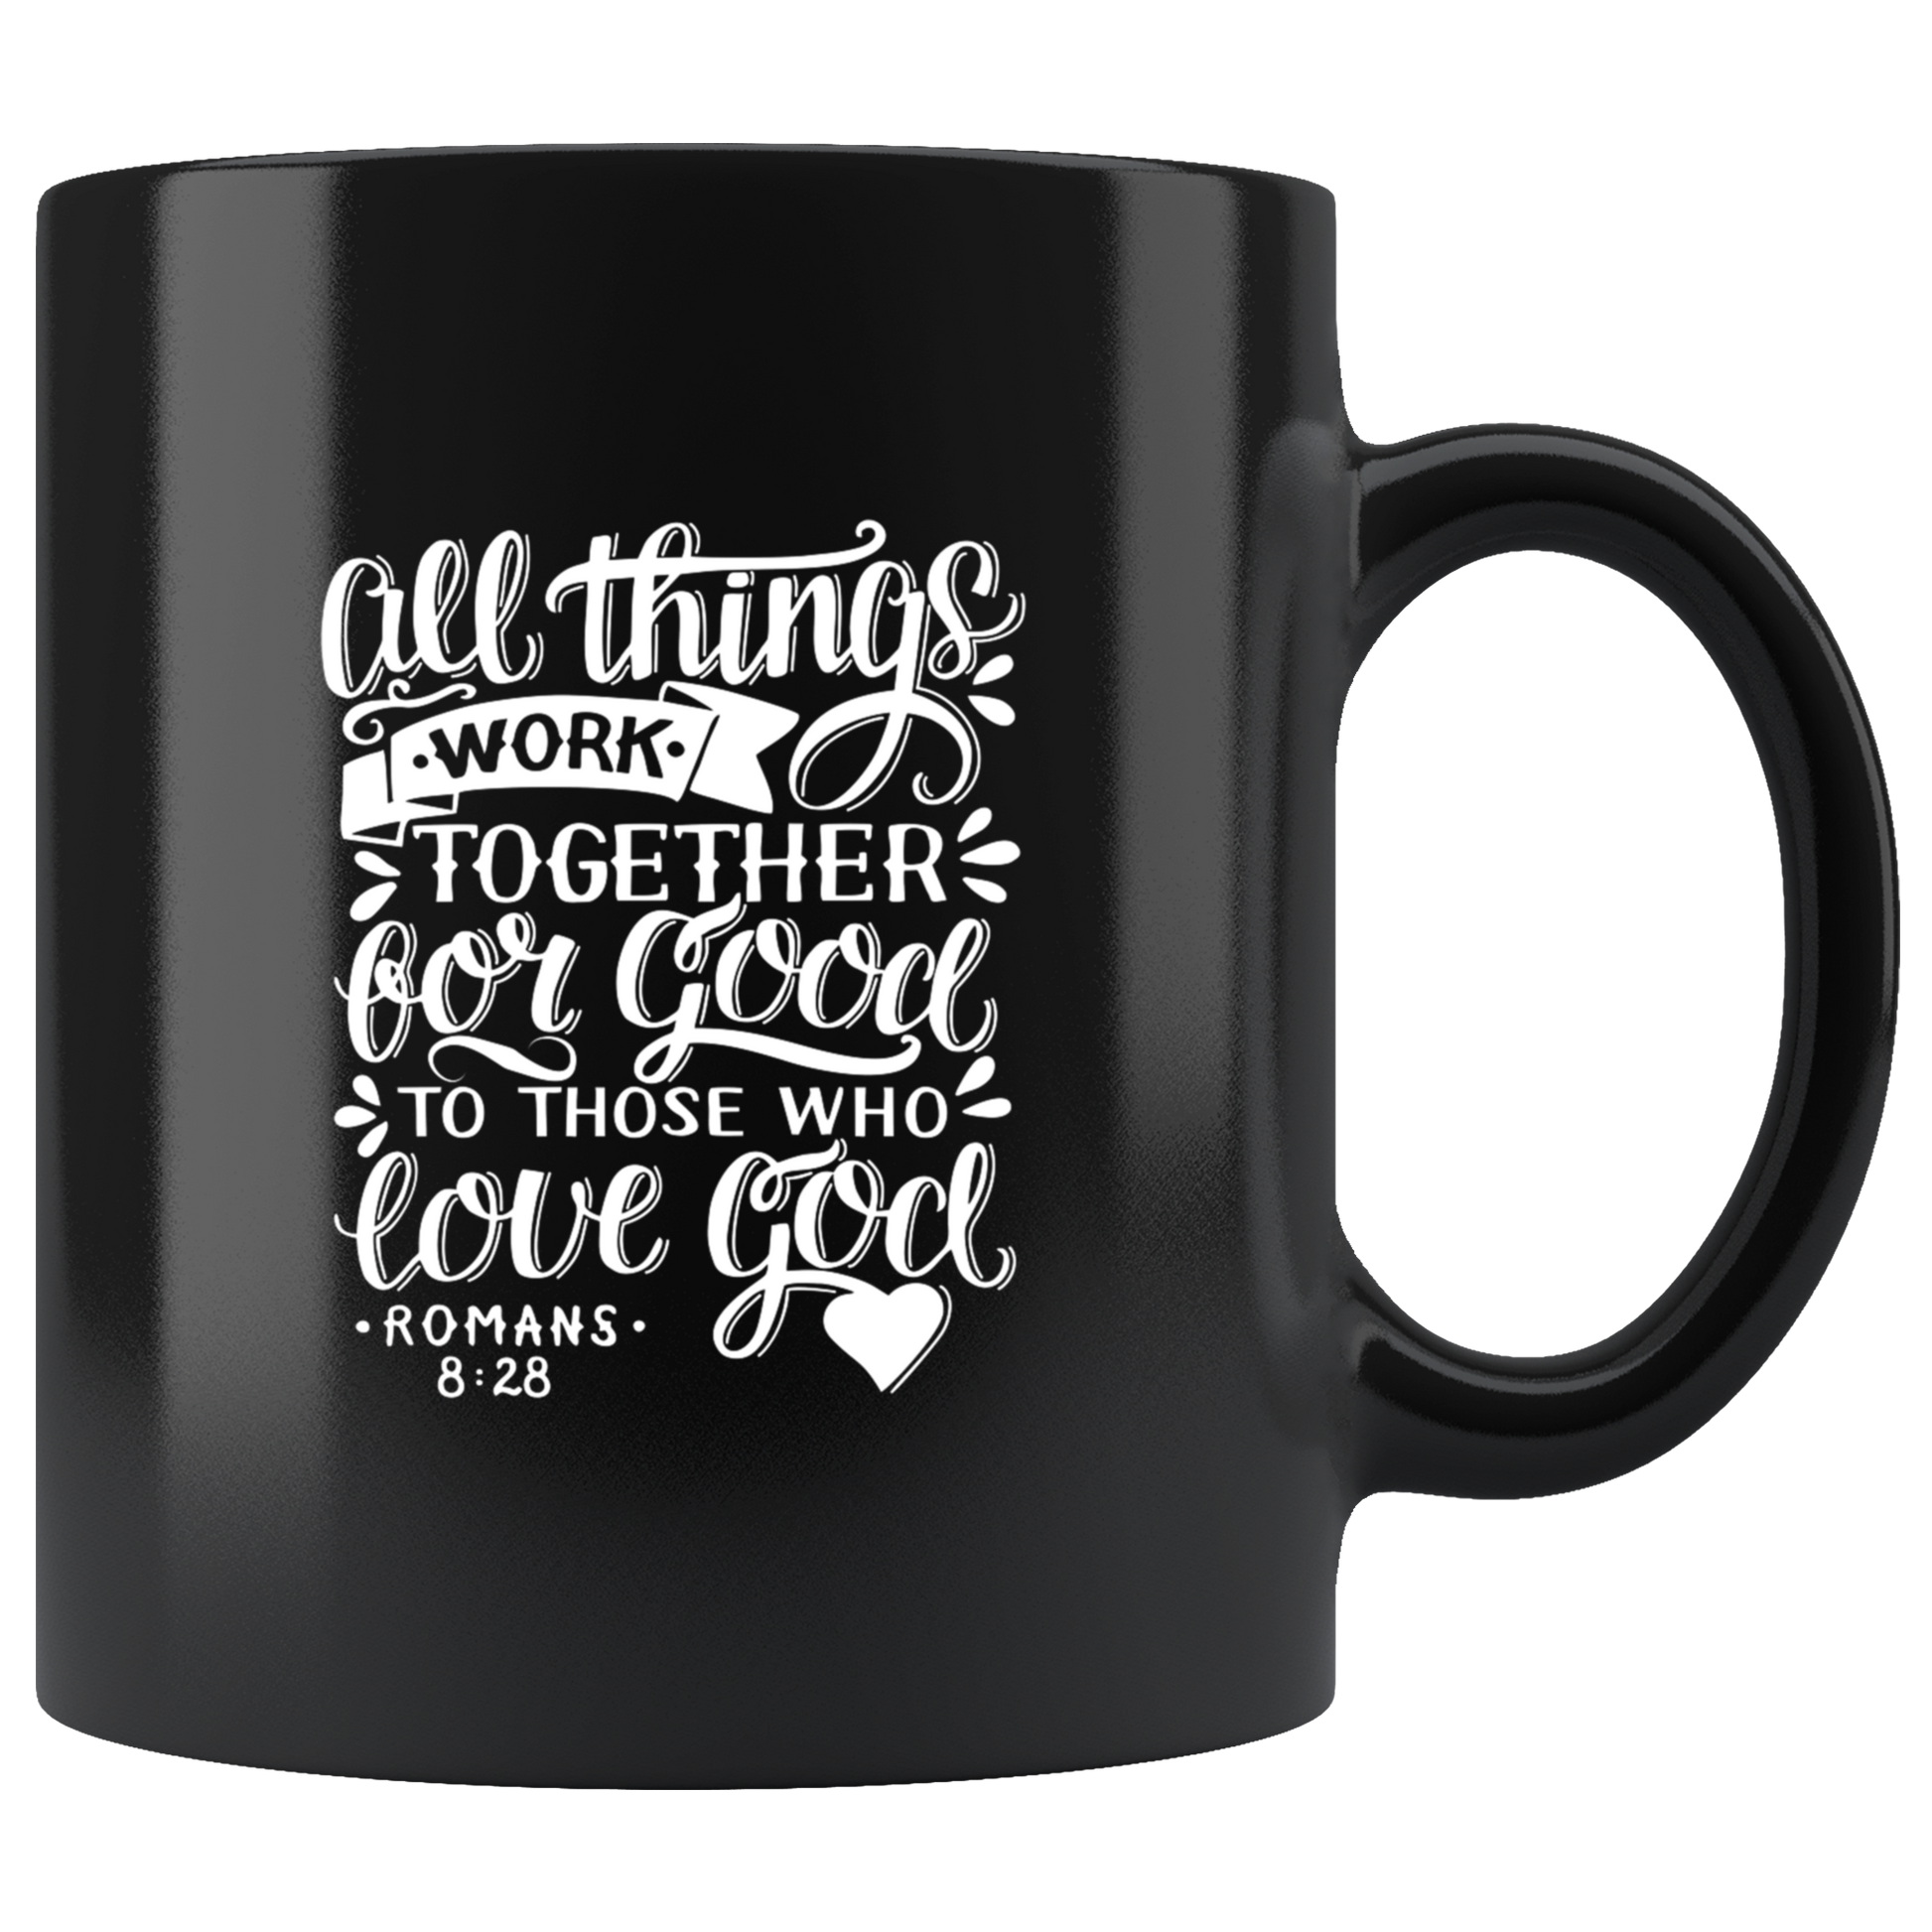 All Things Work Together For Good To Those Who Love God, Romans 8:28 - Black 11oz Mug